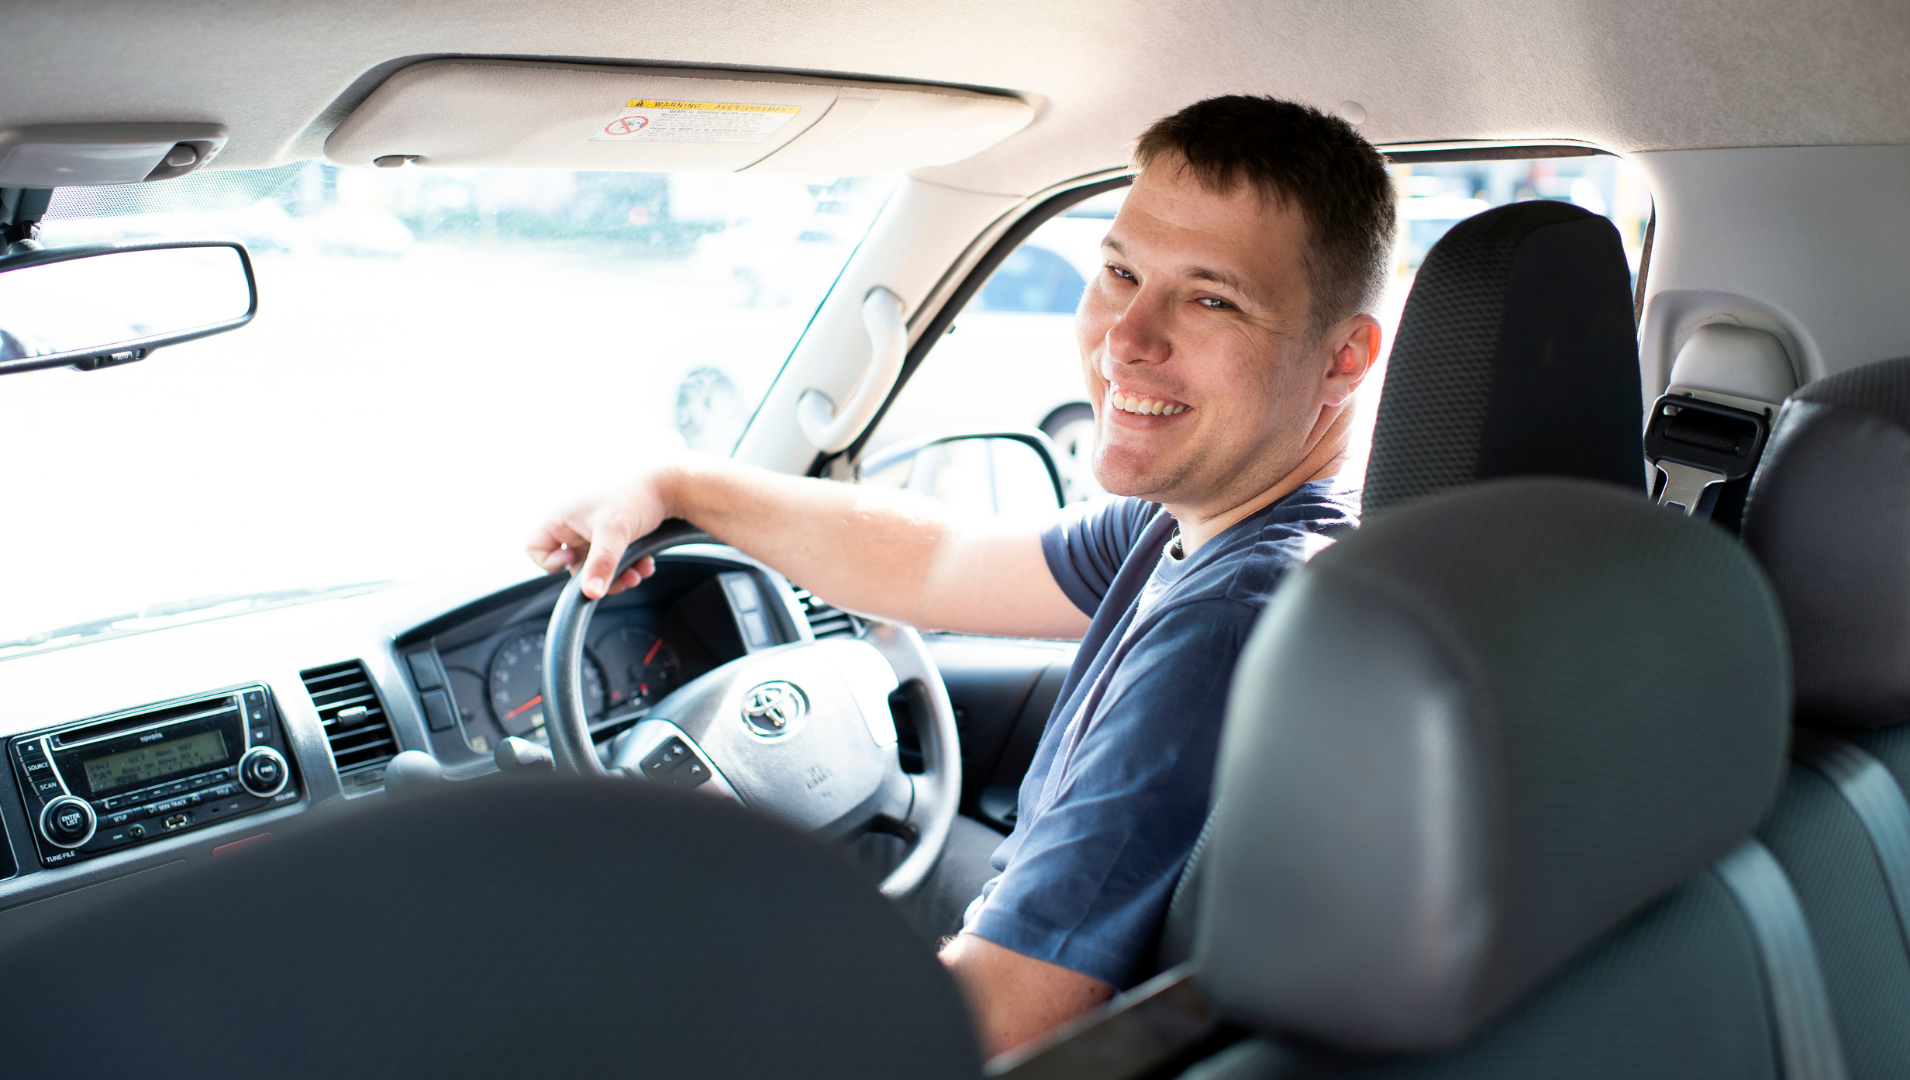 Alex pictured sitting in the front seat of a work can, in the driver's seats, smiling to a person in the back